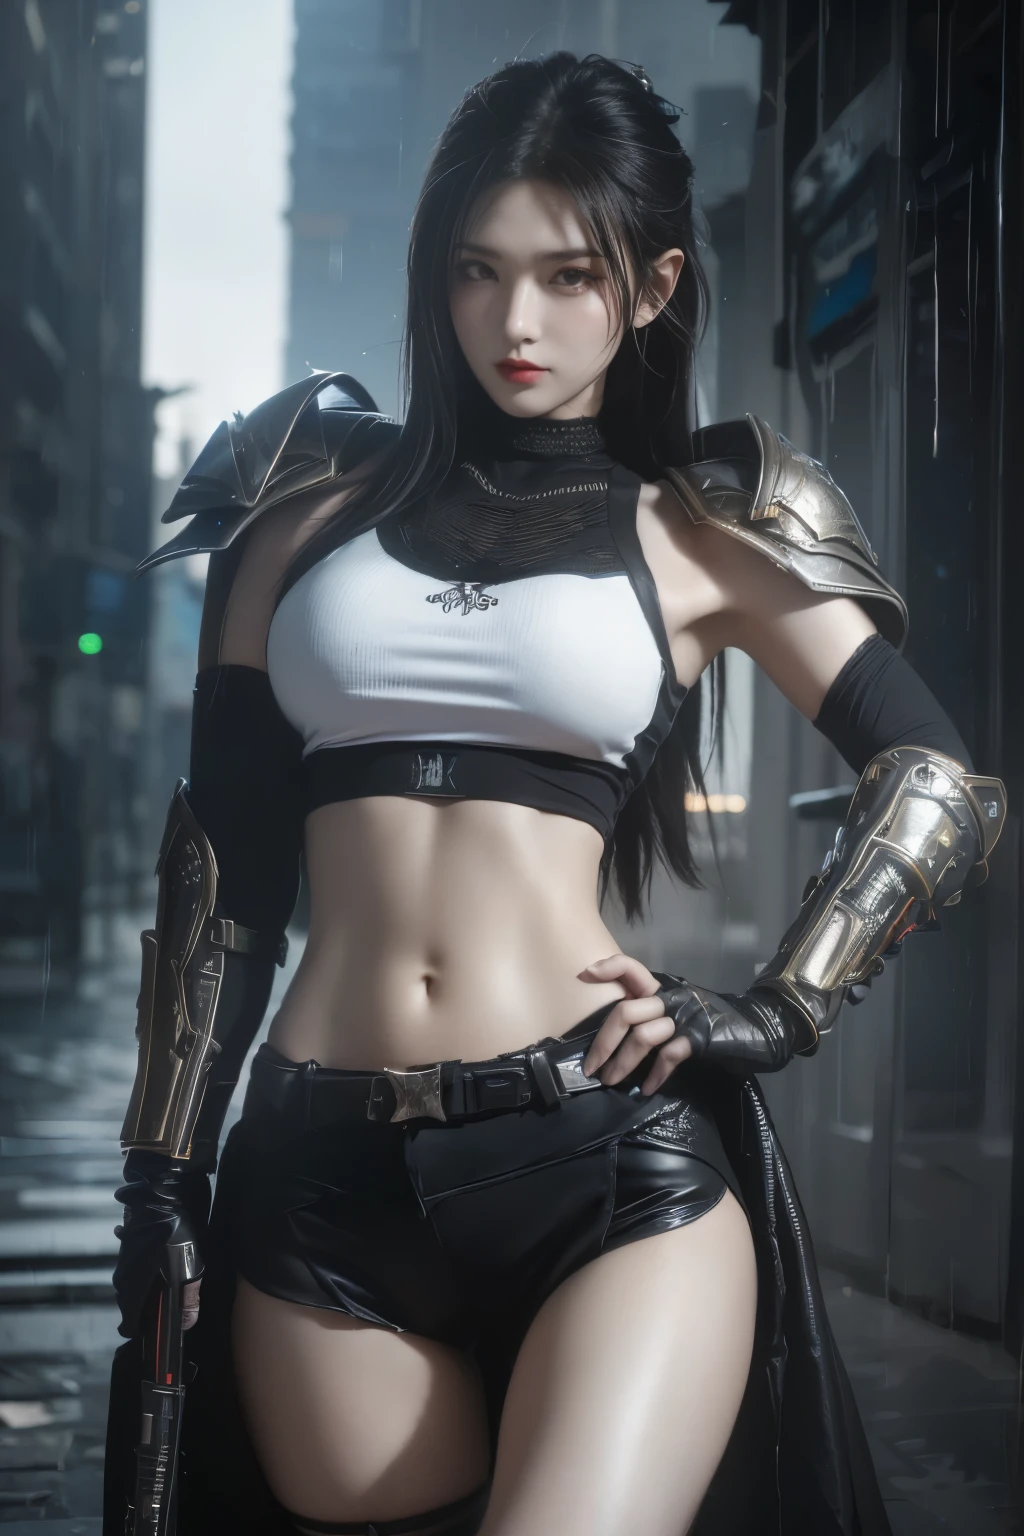 tmasterpiece,Best quality,A high resolution,8K,(Portrait photograph:1.5),(ROriginal photo),real photograph,digital photography,(Combination of cyberpunk and fantasy style),(Female soldier),20 year old girl,random hair style,By bangs,(Red eyeigchest, accessories,Redlip,(He frowned,Sneer),(Cyberpunk combined with fantasy style clothing,Openwork design,joint armor,police uniforms,Combat Assassin Costume,),exposing your navel,Photo pose,Realisticstyle,Thunder and lightning on rainy day,(Thunder magic),oc render reflection texture